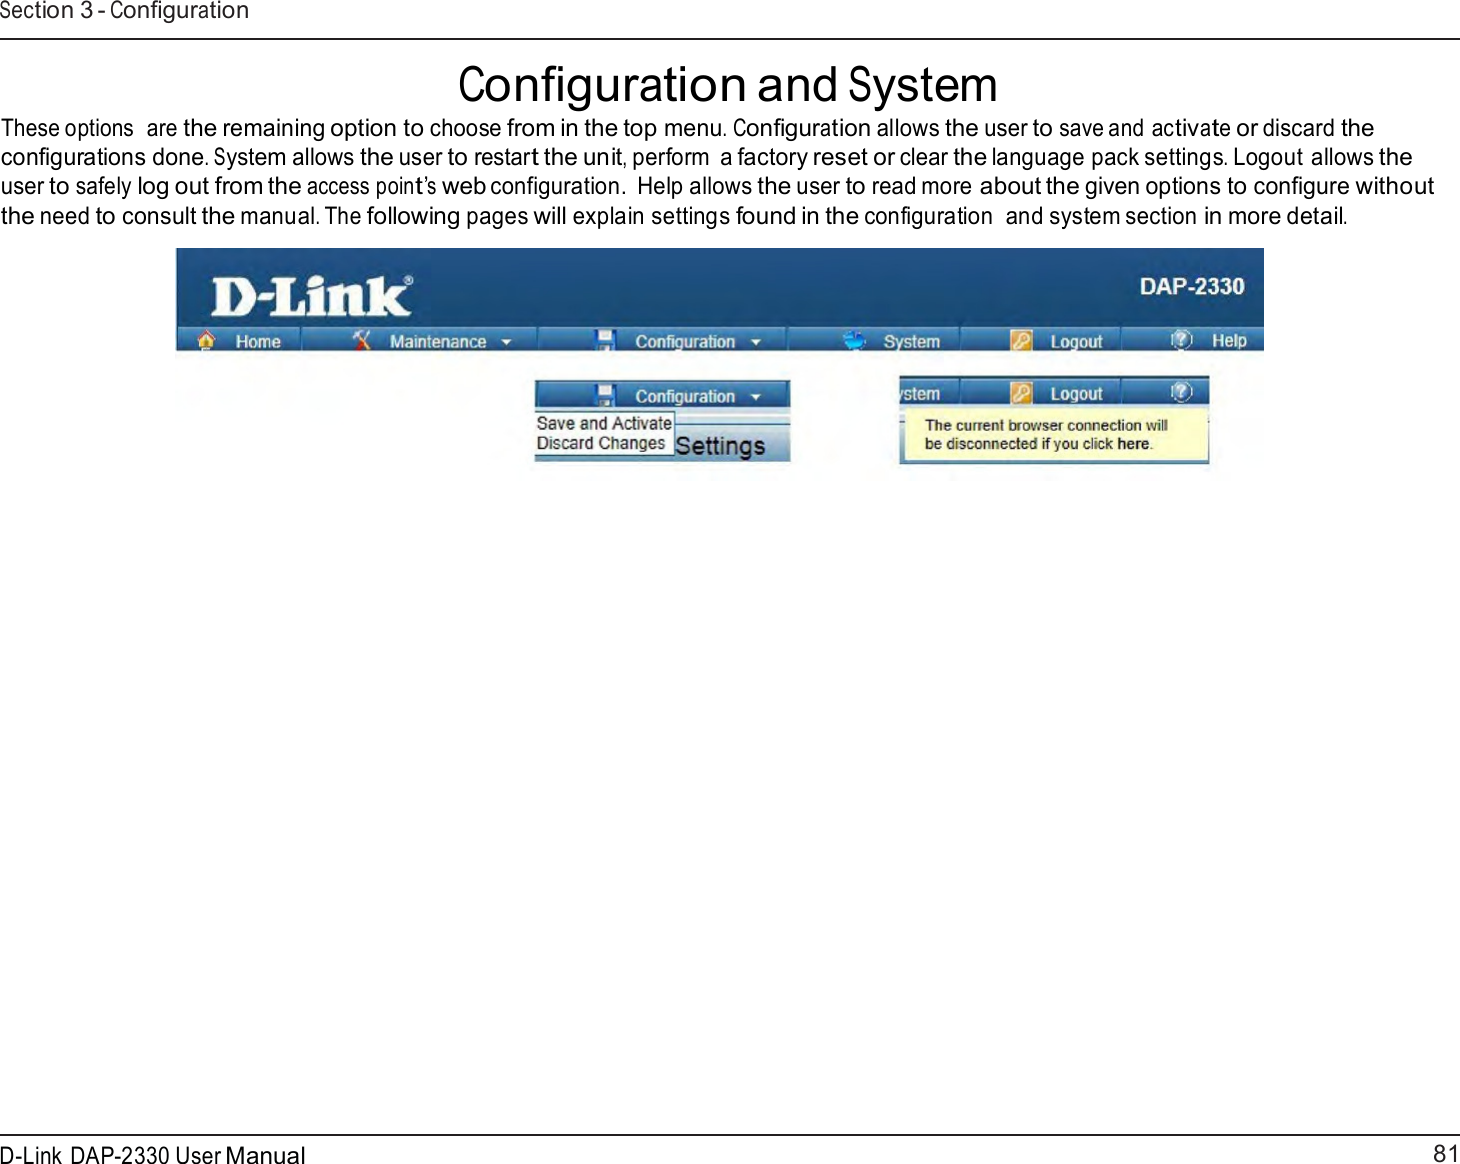 81 D-Link DAP-2330 User ManualSection 3 - Configuration    Configuration and System These options  are the remaining option to choose from in the top menu. Configuration allows the user to save and activate or discard the configurations done. System allows the user to restart the unit, perform  a factory reset or clear the language pack settings. Logout allows the user to safely log out from the access point’s web configuration.  Help allows the user to read more about the given options to configure without the need to consult the manual. The following pages will explain settings found in the configuration  and system section in more detail.   